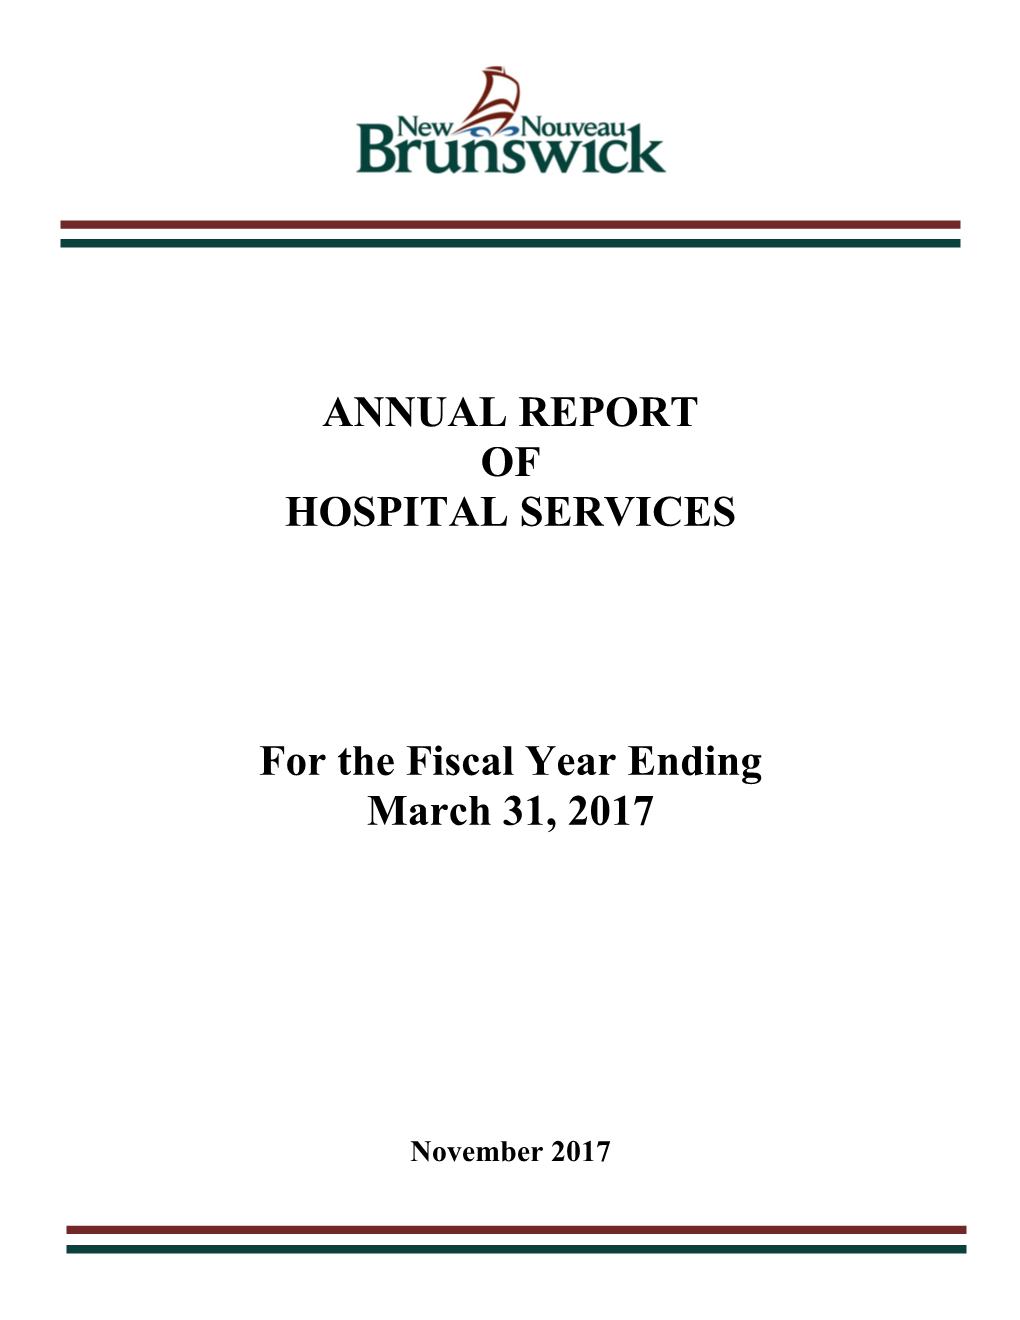 ANNUAL REPORT of HOSPITAL SERVICES for the Fiscal Year